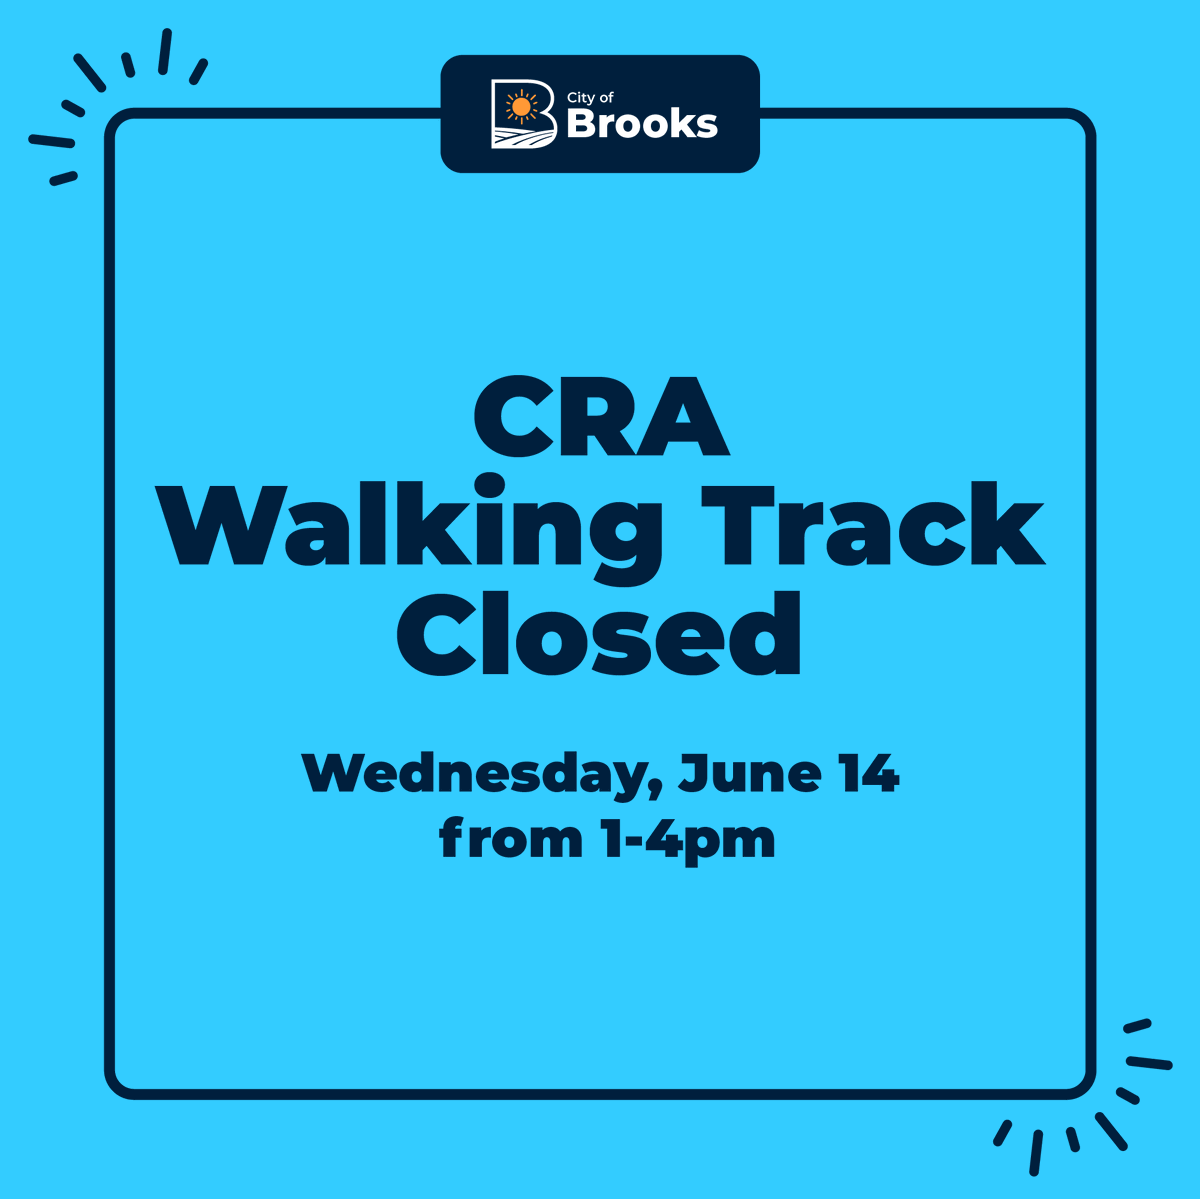 The Centennial Regional Arena Walking Track will be closed Wednesday, June 14 from 1-4pm.